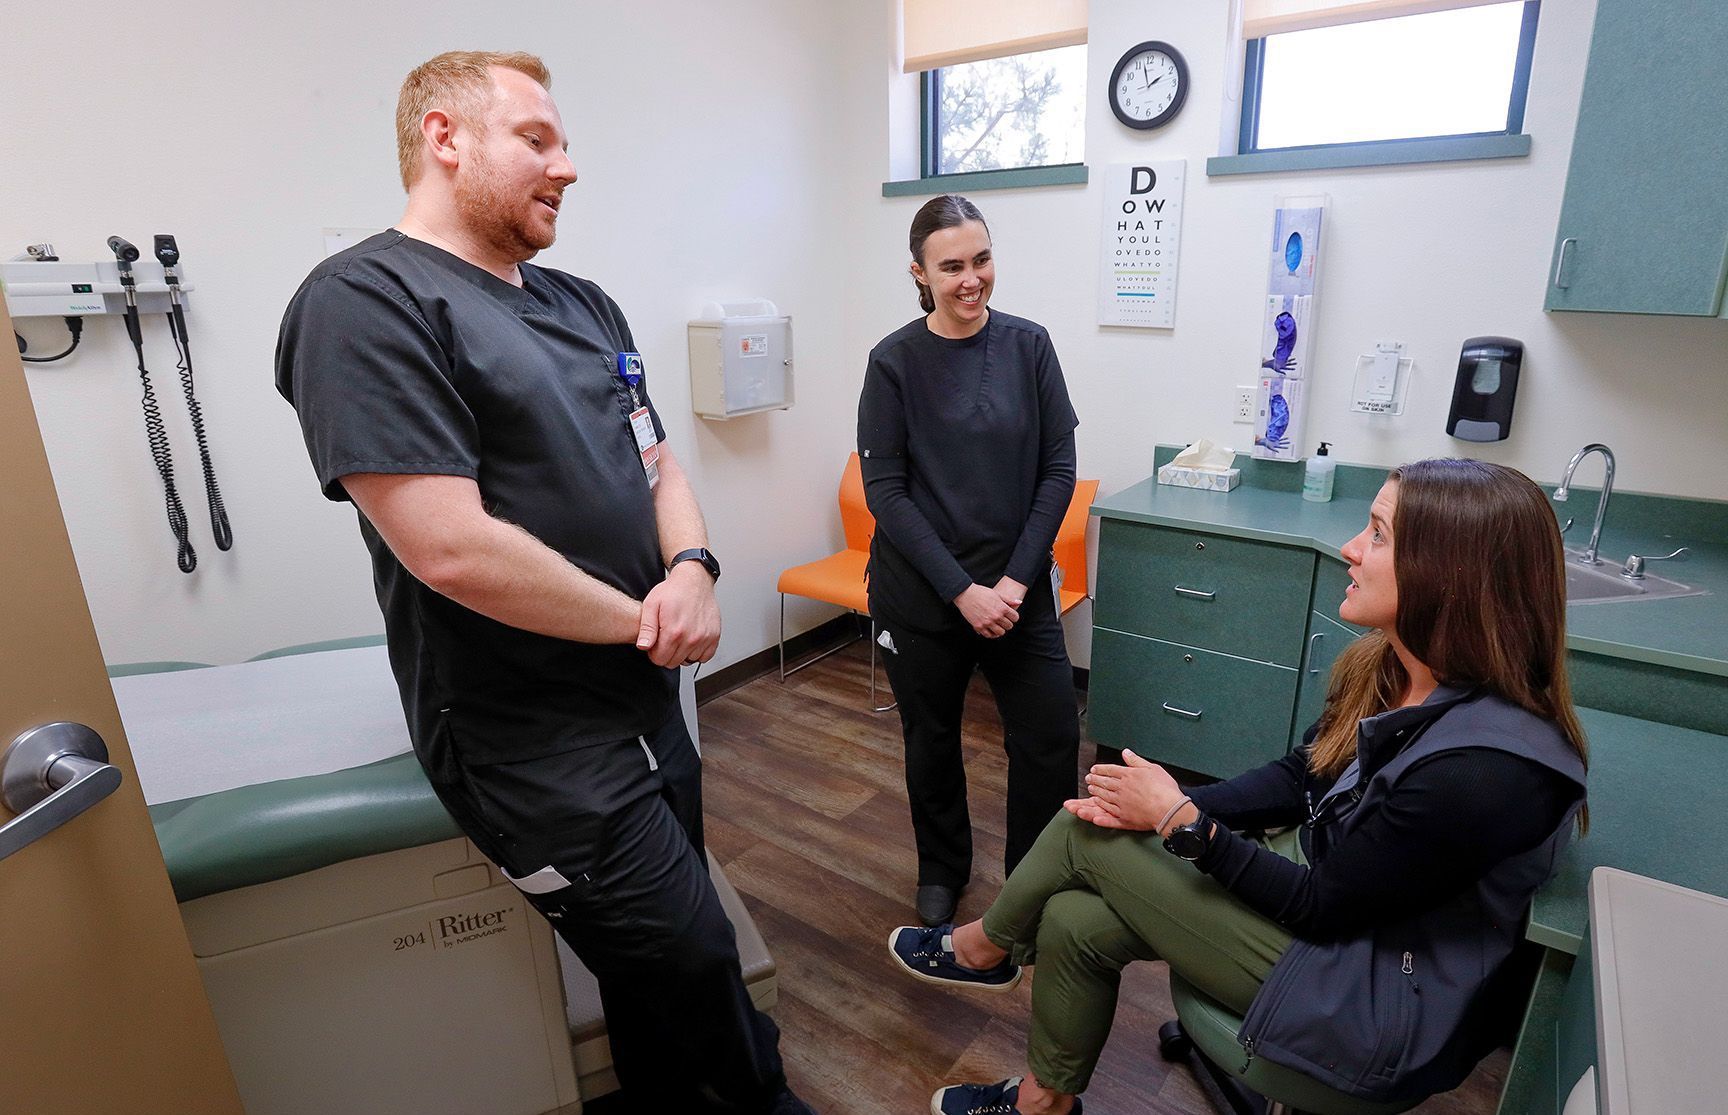 Dr. Sarah Coles (center) consults with residents Dr. Tyler Hanny and Dr. Tasha Harder in an exam room at North Country’s Flagstaff facility.